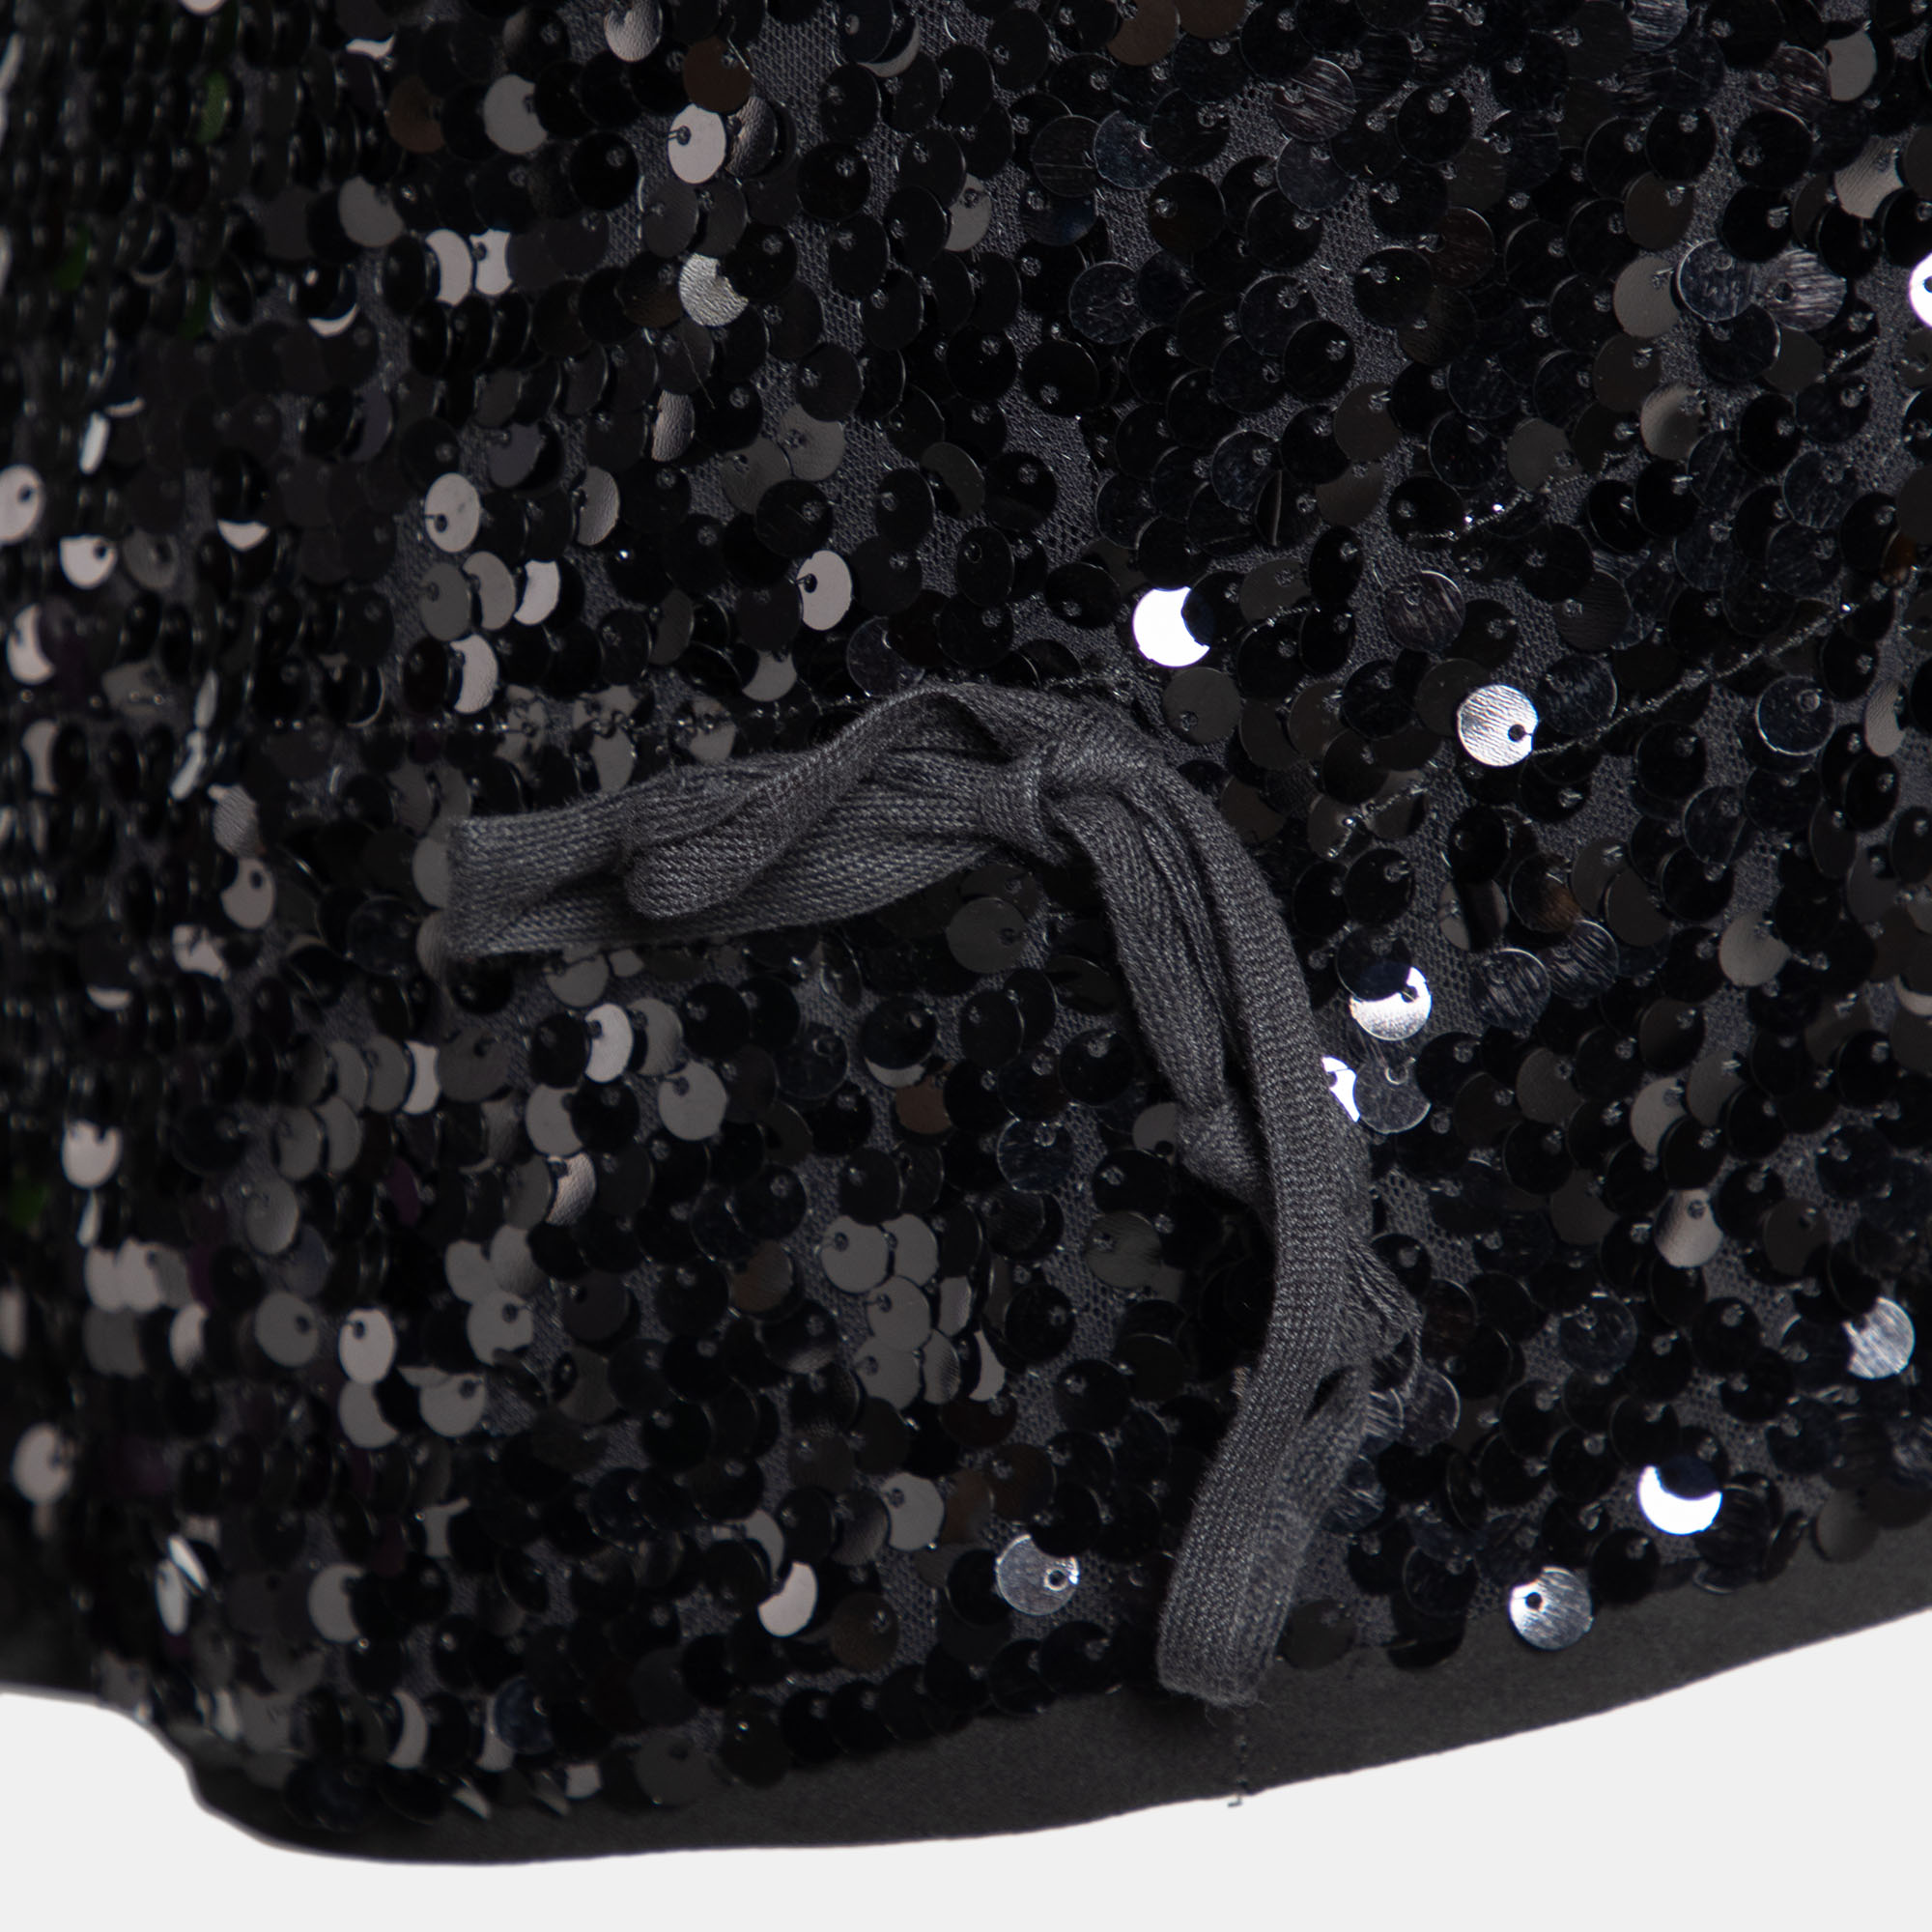 Givenchy Black Sequin Embellished Chiffon Top S